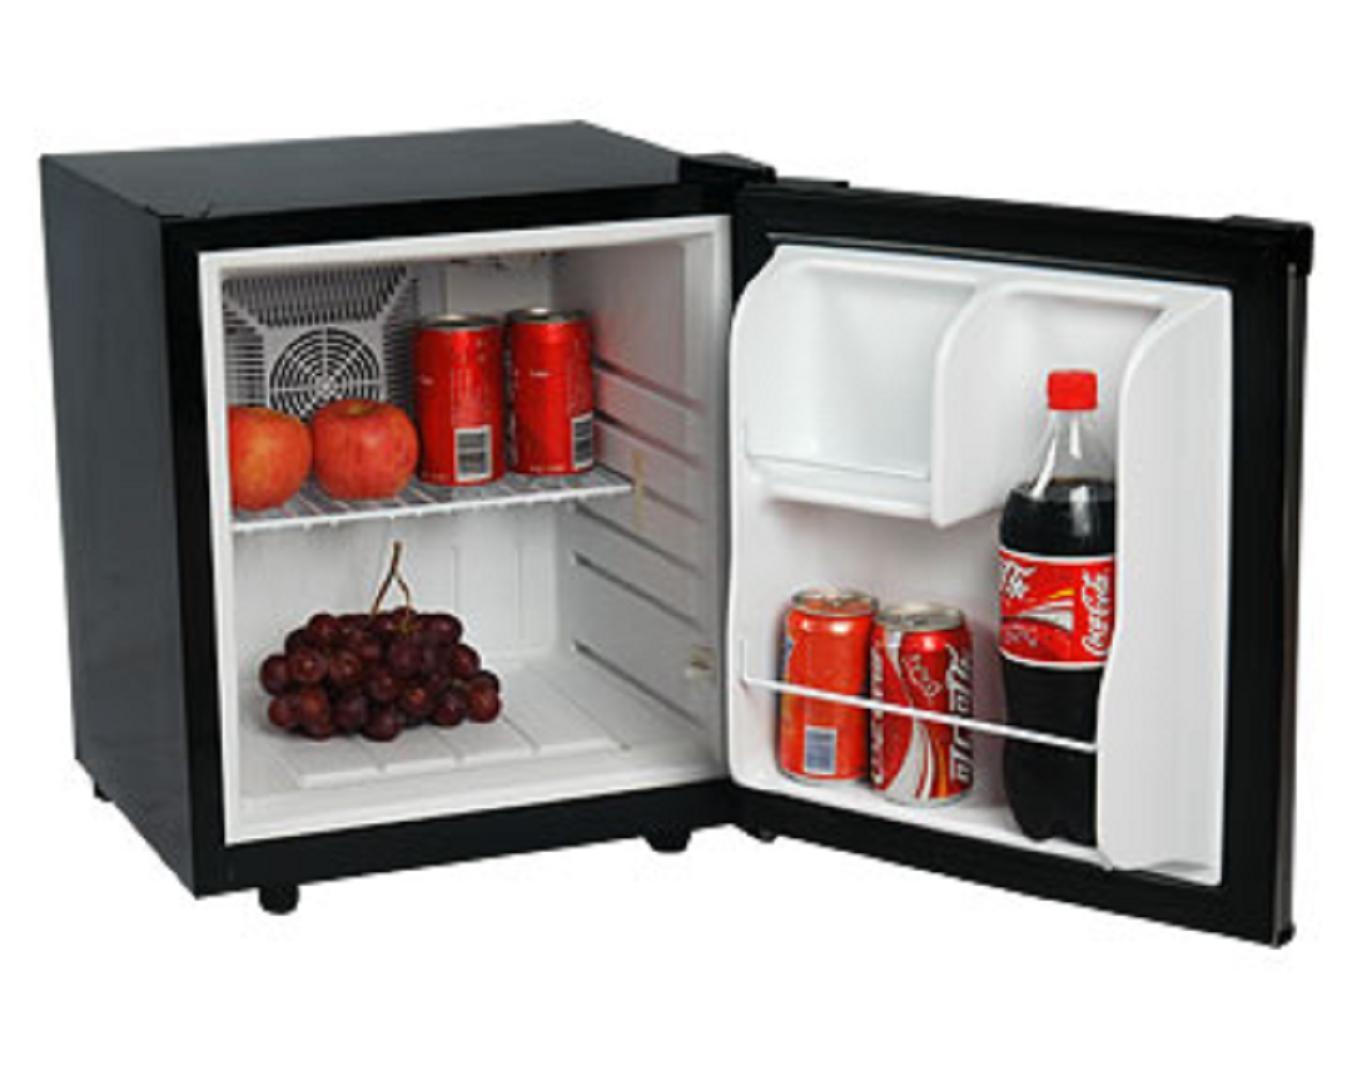 Refrigerator smallest size price in india